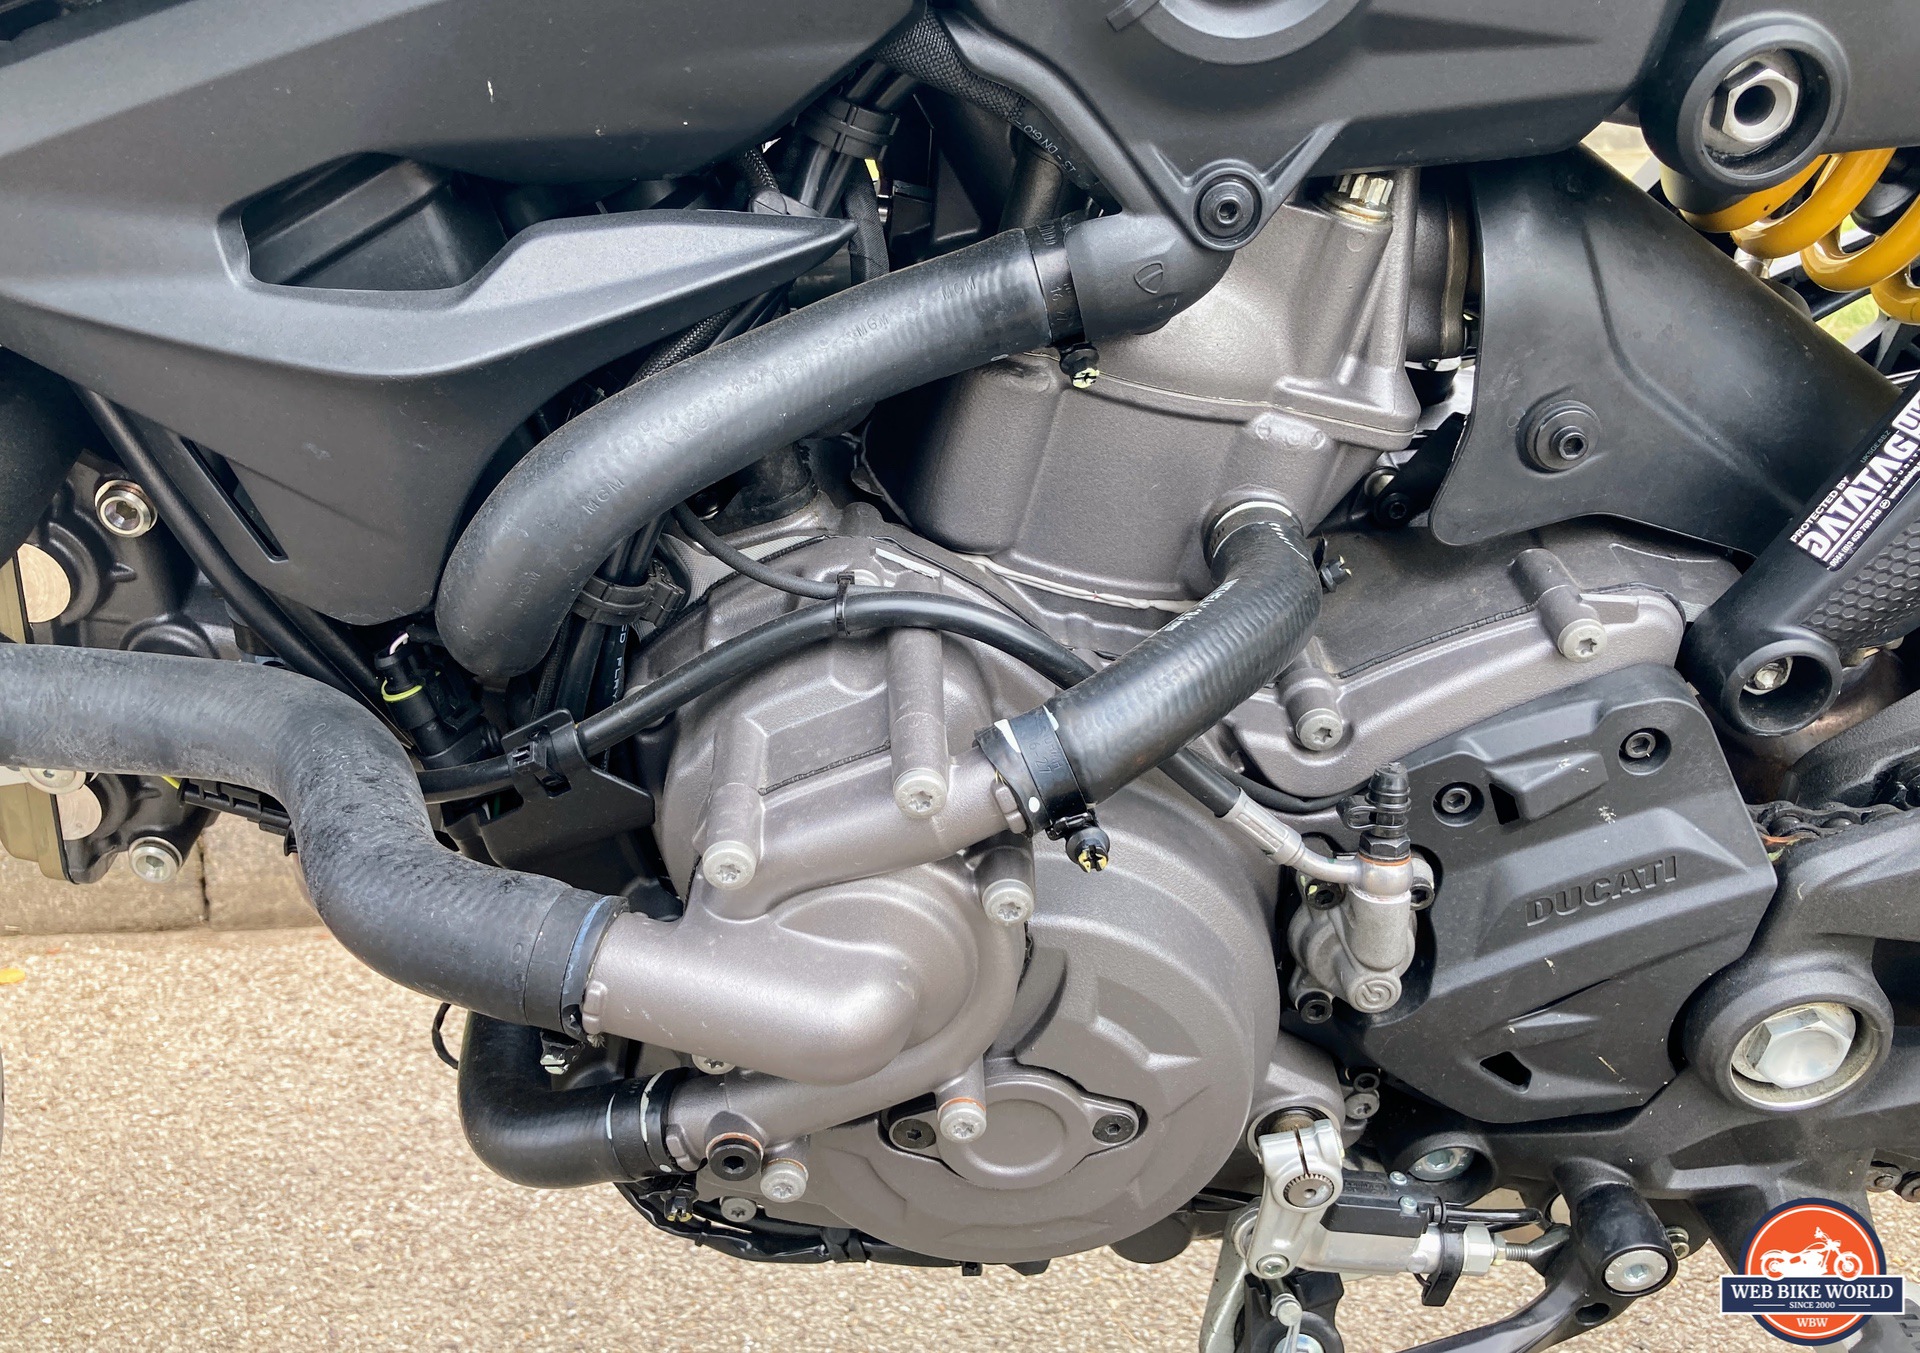 Quick Shift technology on the Ducati Monster 950